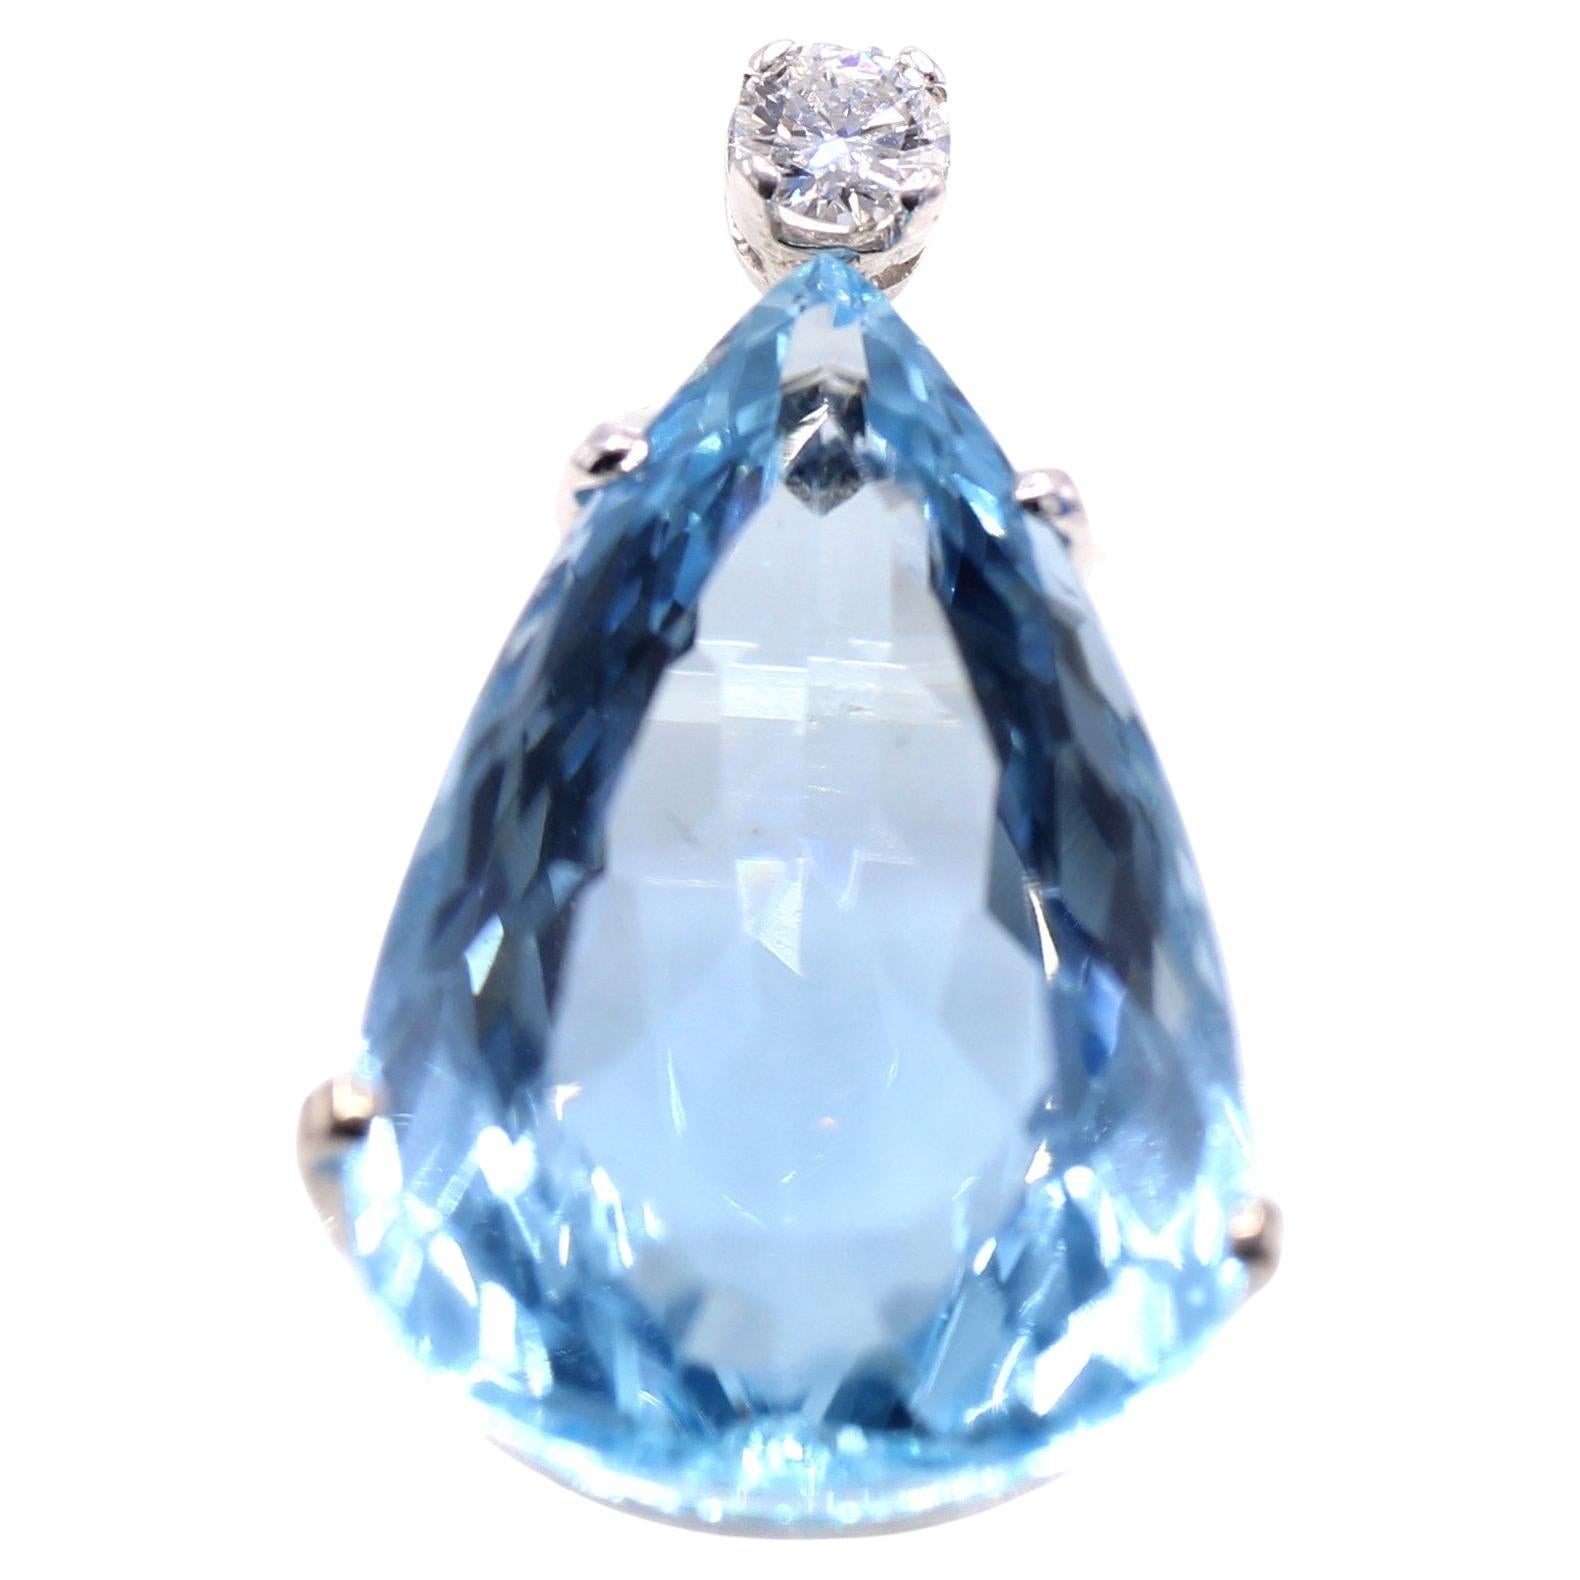 A beautifully cut Santa Maria blue pear shape aquamarine is the center piece of this lovely pendant. Set in a 18 karat white gold handcrafted pendant with a bright white round brilliant cut diamond at the top of the bail. The pendant is accompanied